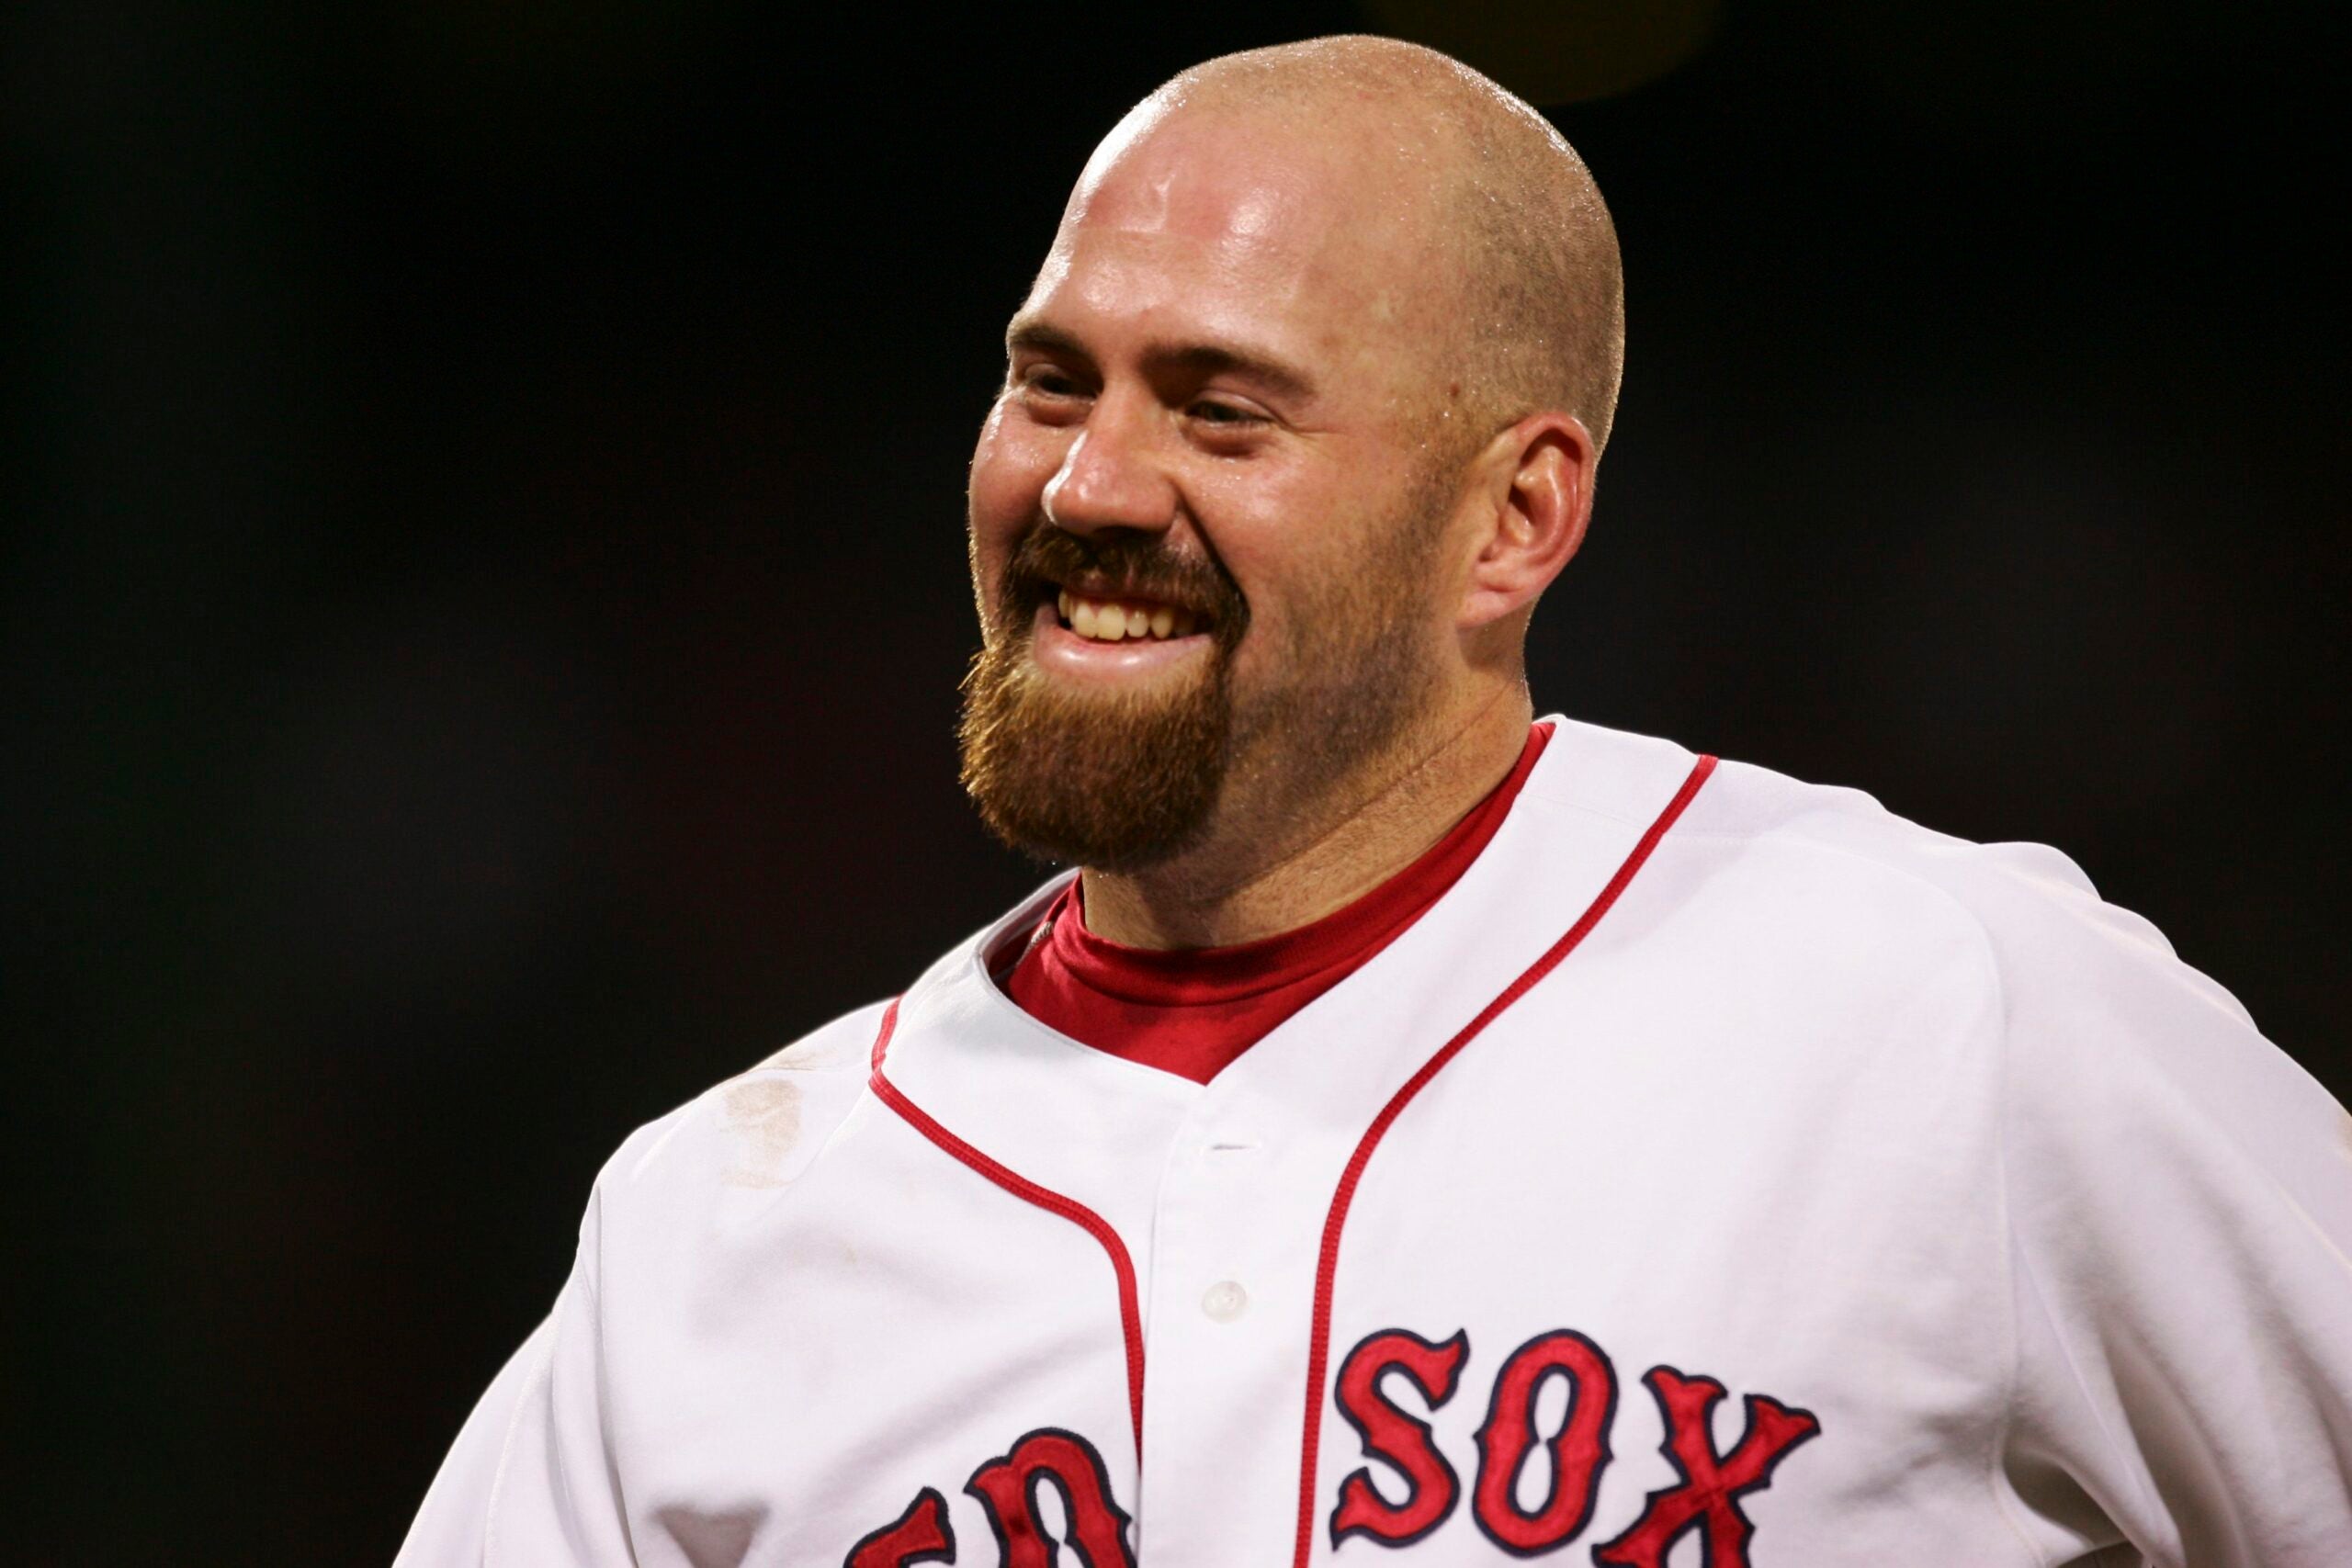 Kevin Youkilis will be NESN's primary color analyst for Red Sox